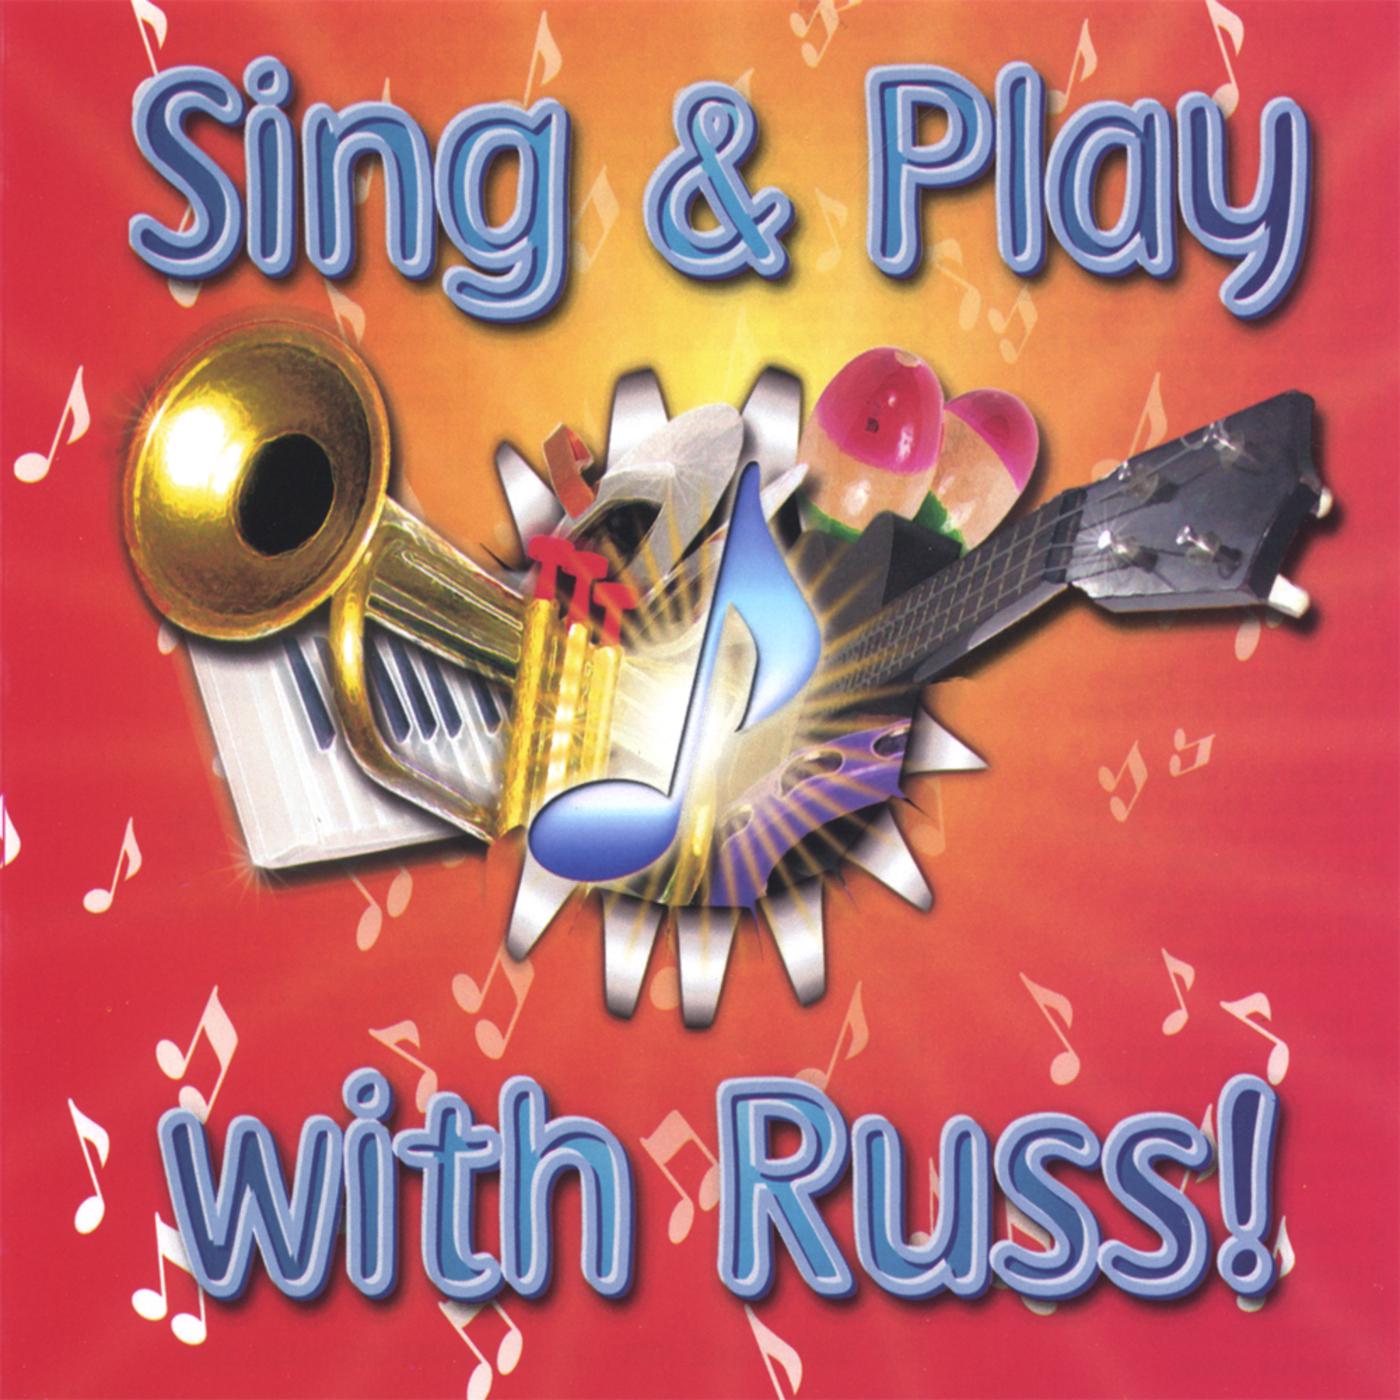 Russ - You'll Sing A Song And I'll Sing A Song